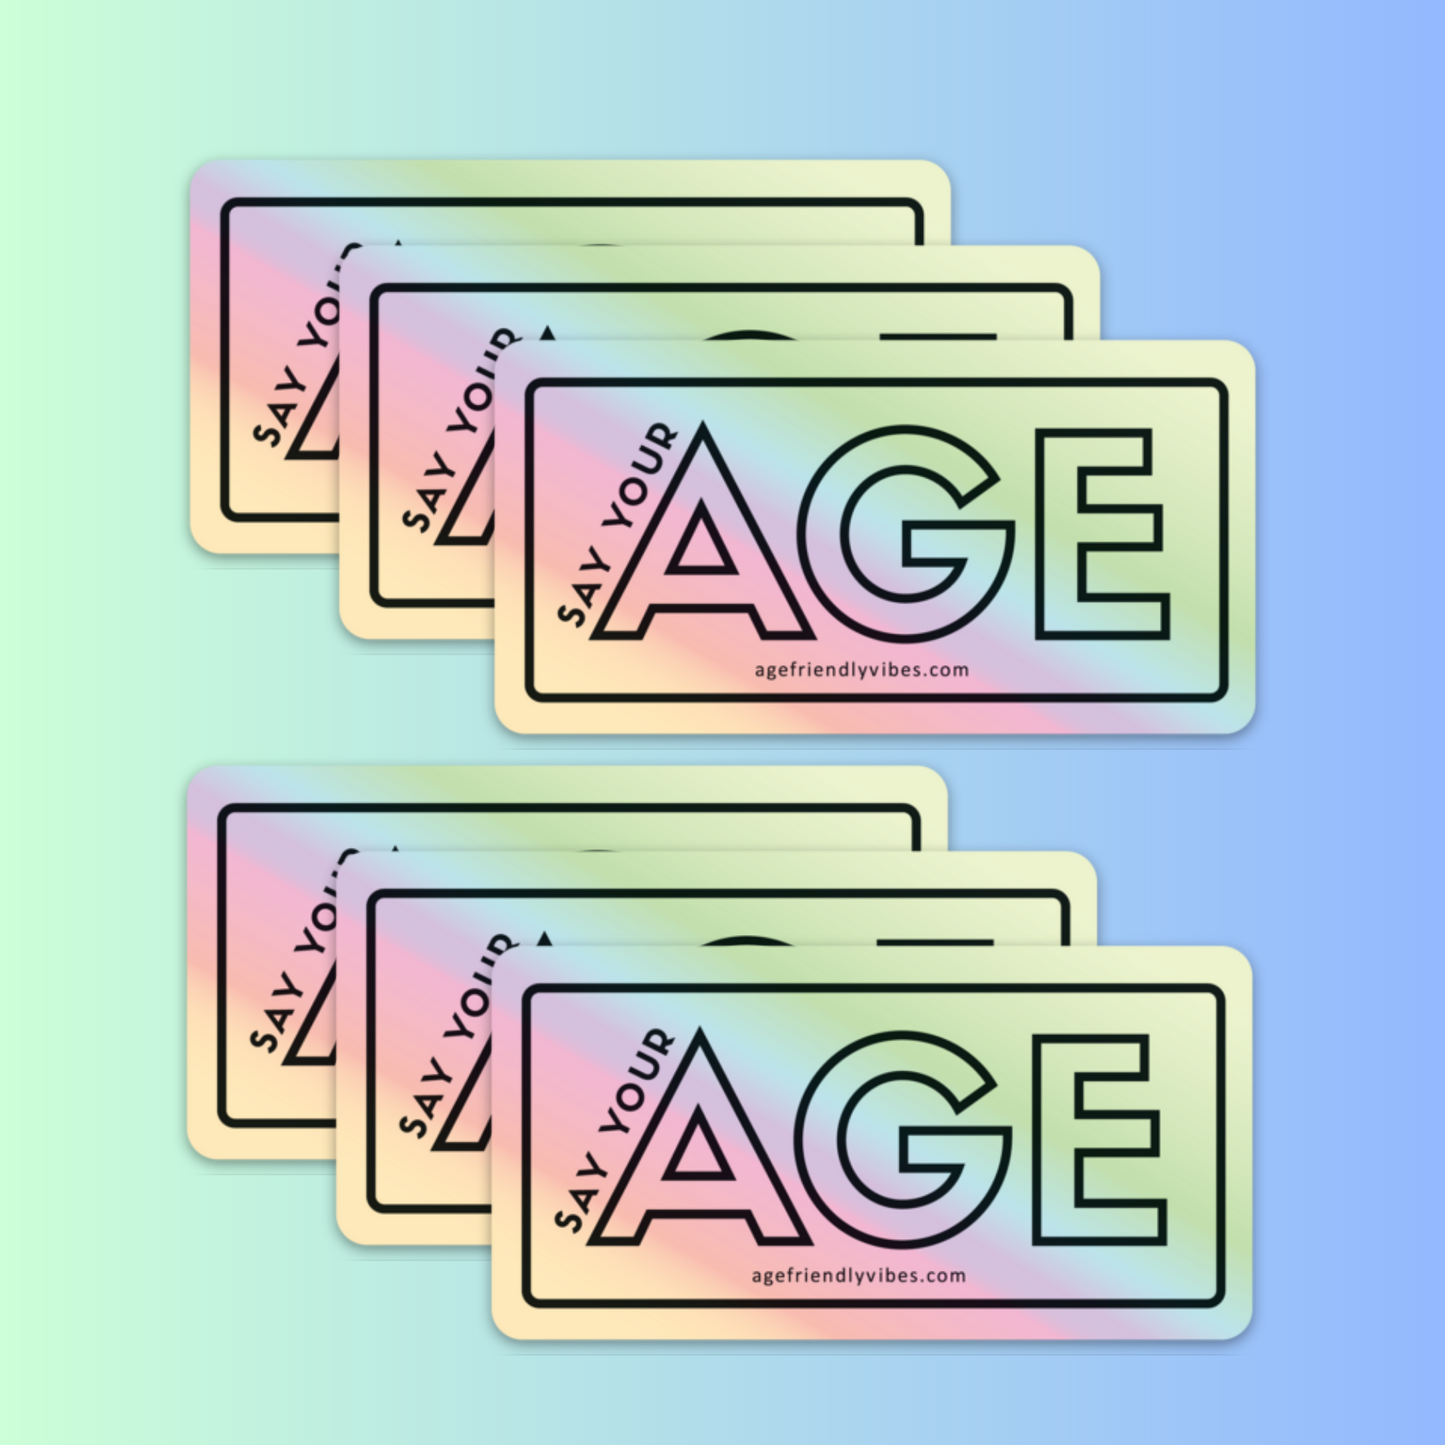 Say Your Age Holographic Sticker